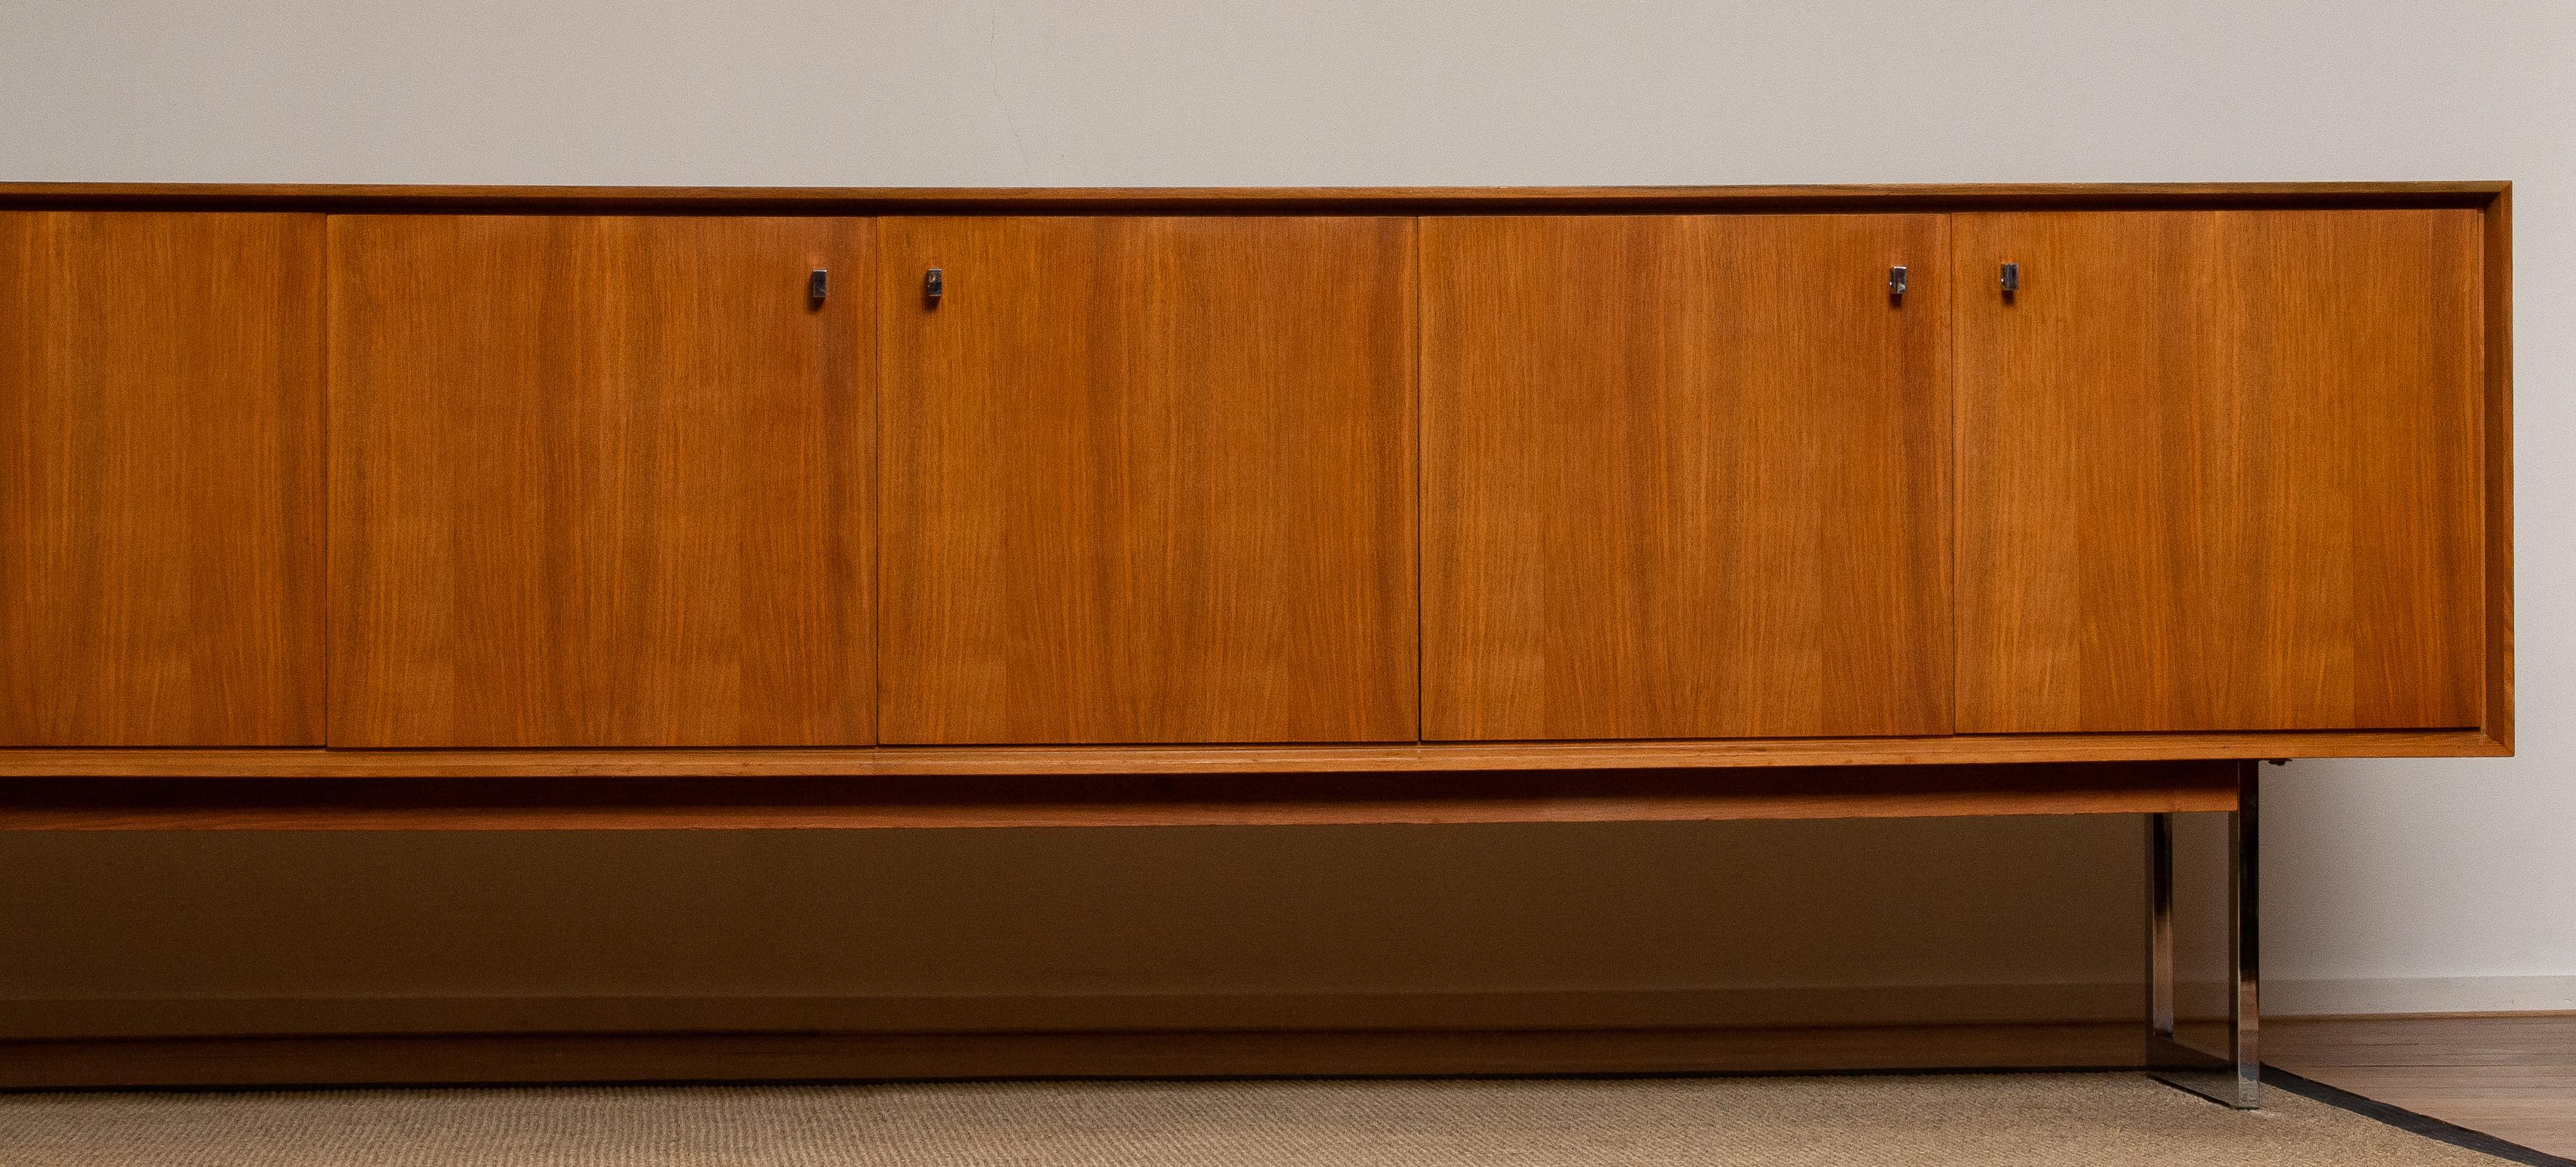 1970, Wide Credenzas Sideboard in Walnut with Chrome Handles and Legs 1